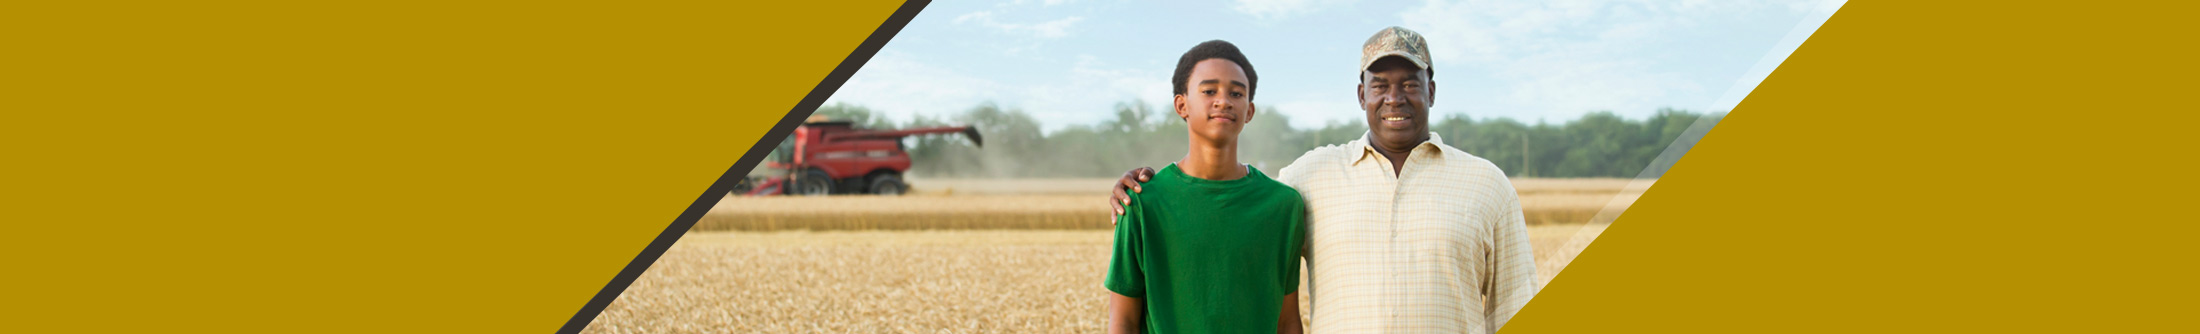 Farmer and son with equipment in wheat field